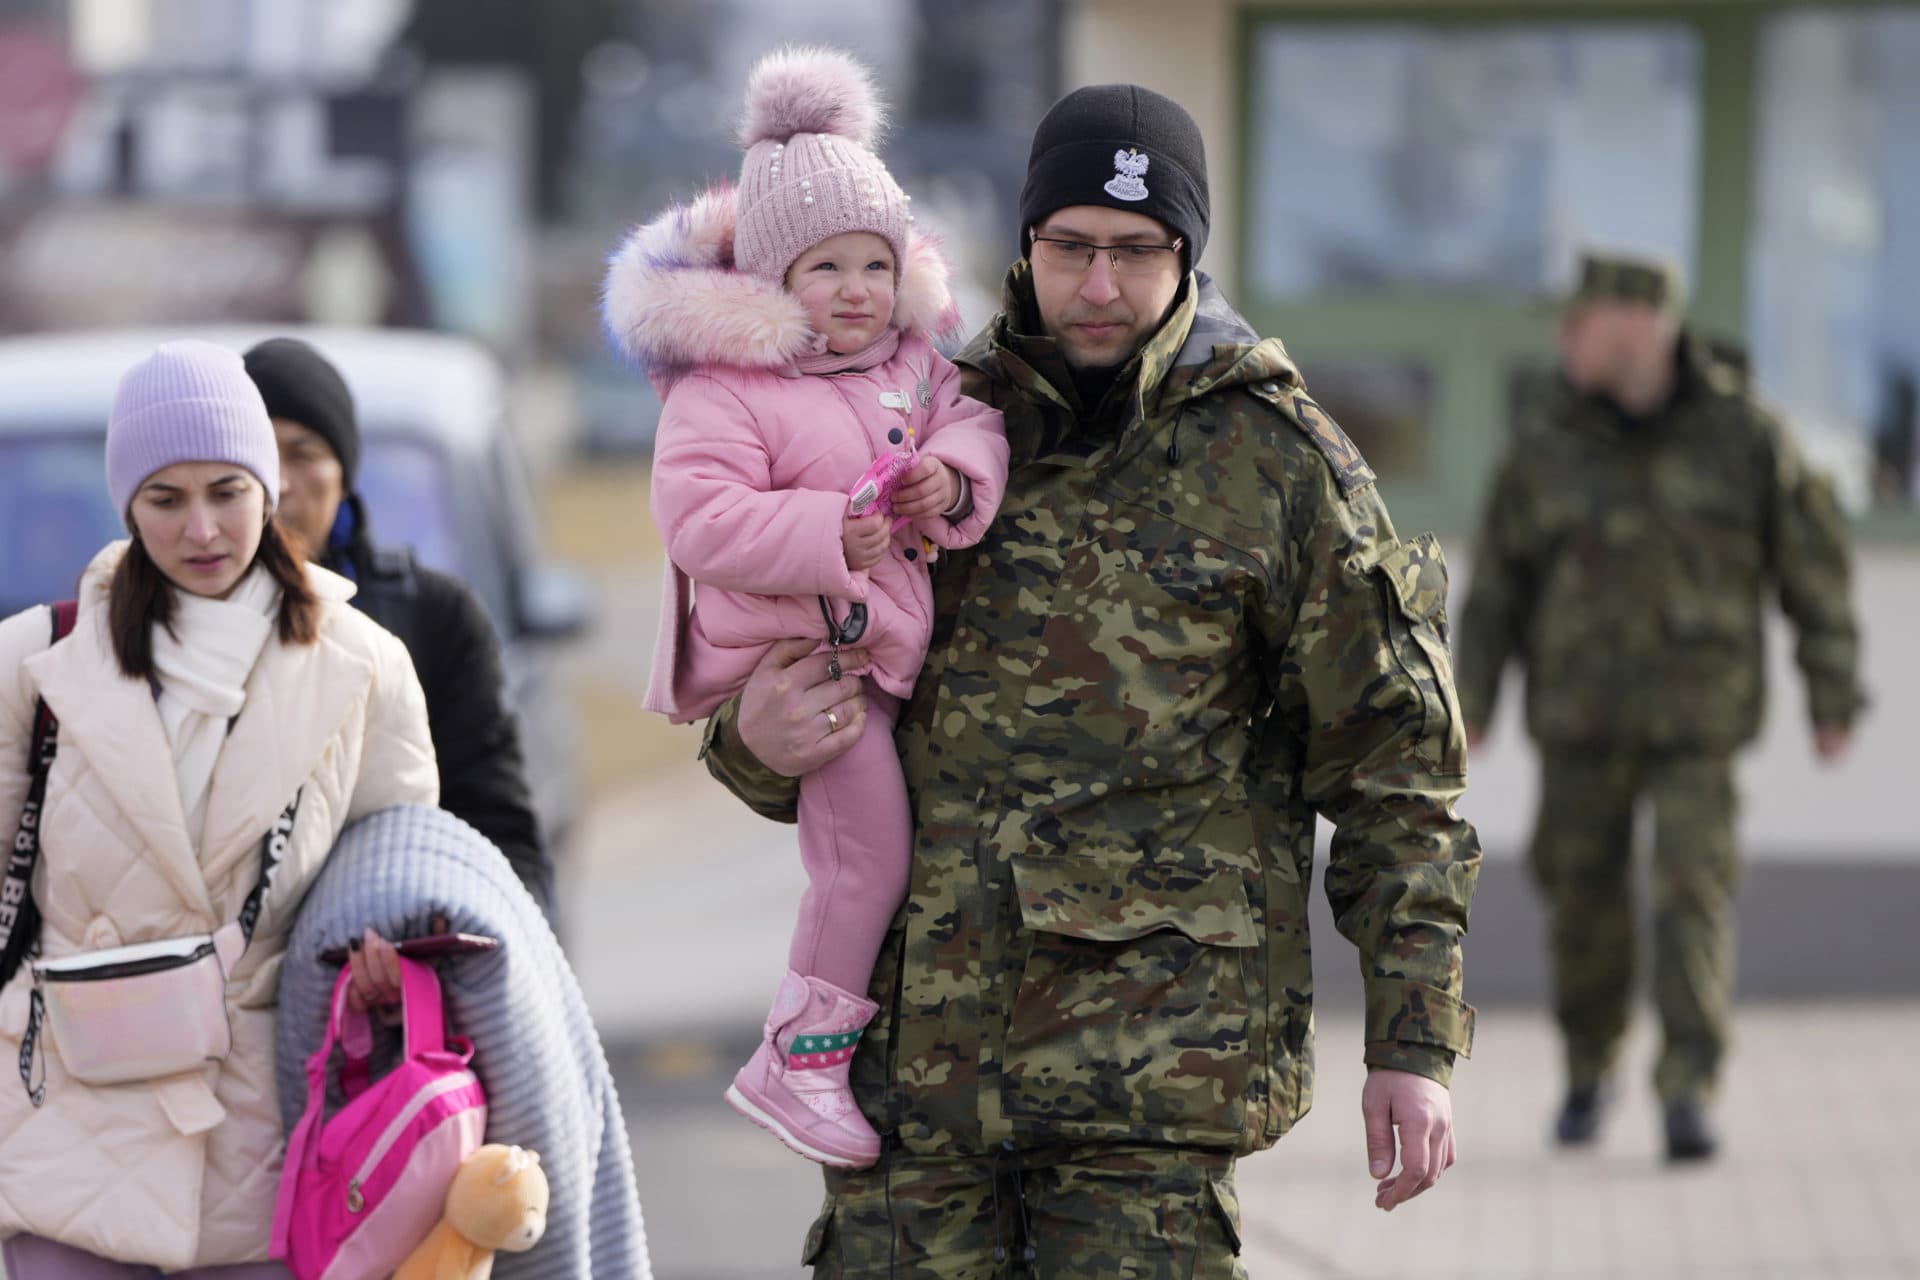 A Polish border guard carries a child as refugees from Ukraine cross into Poland at the Medyka crossing on March 1. (Markus Schreiber/AP)